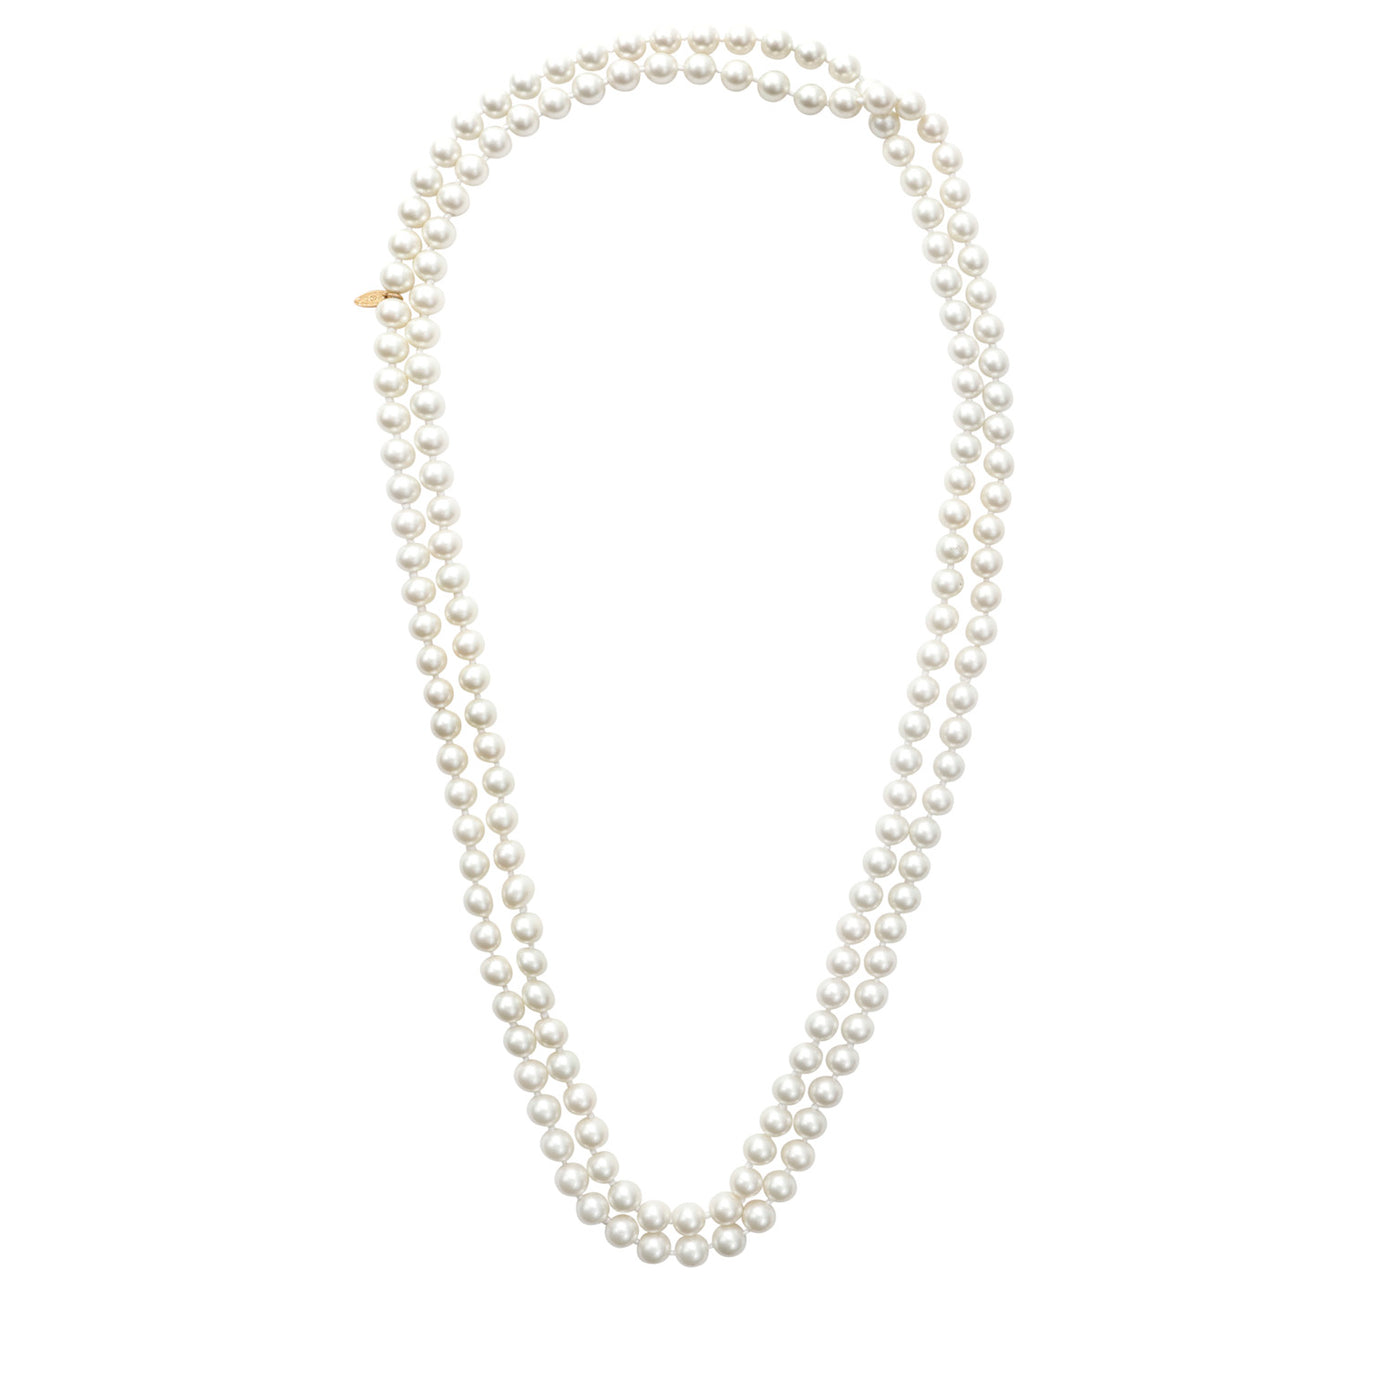 Chanel Extra Long Pearl Sautoir Necklace